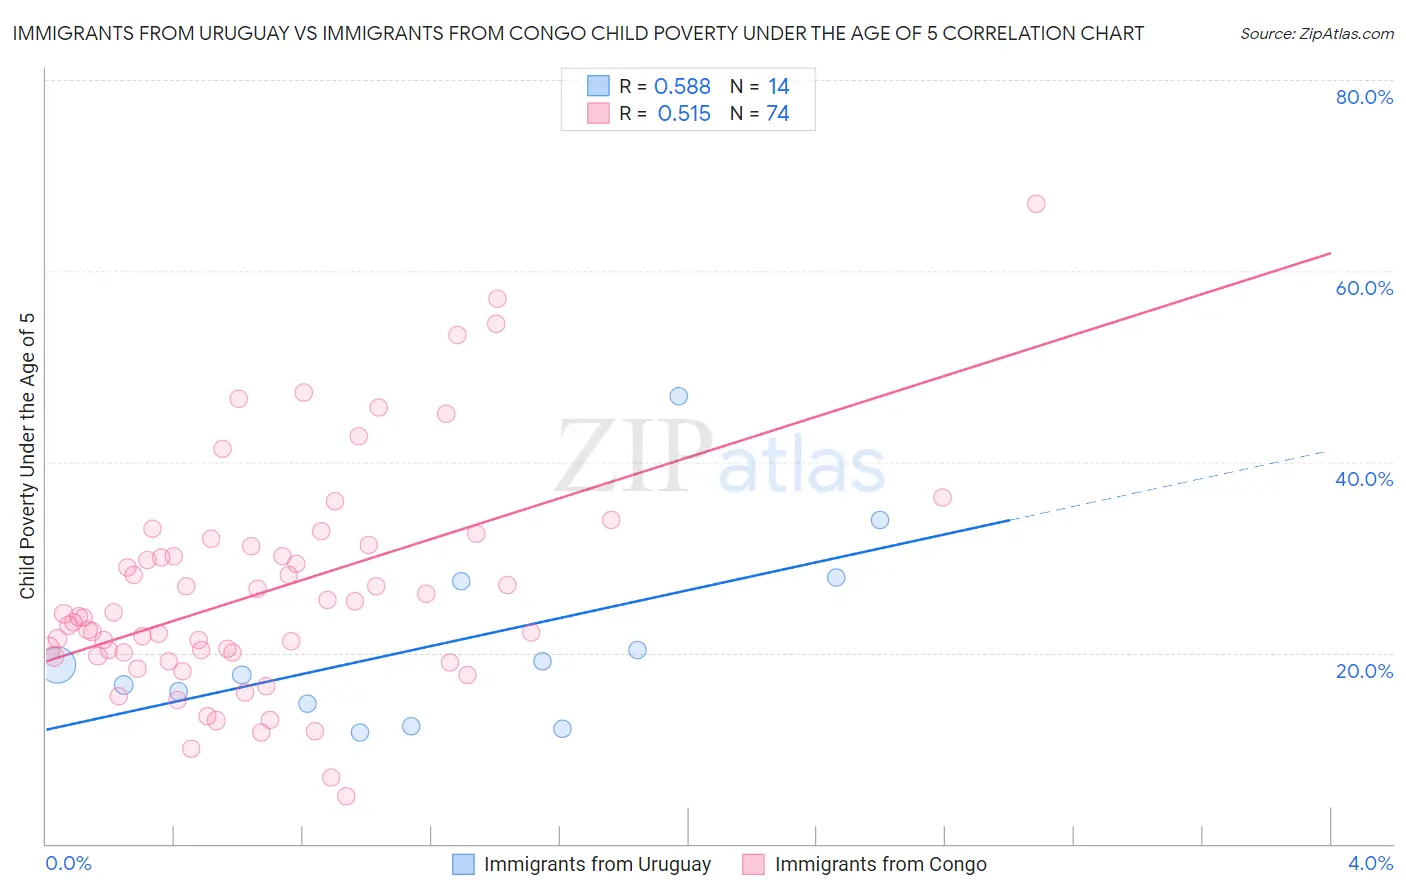 Immigrants from Uruguay vs Immigrants from Congo Child Poverty Under the Age of 5